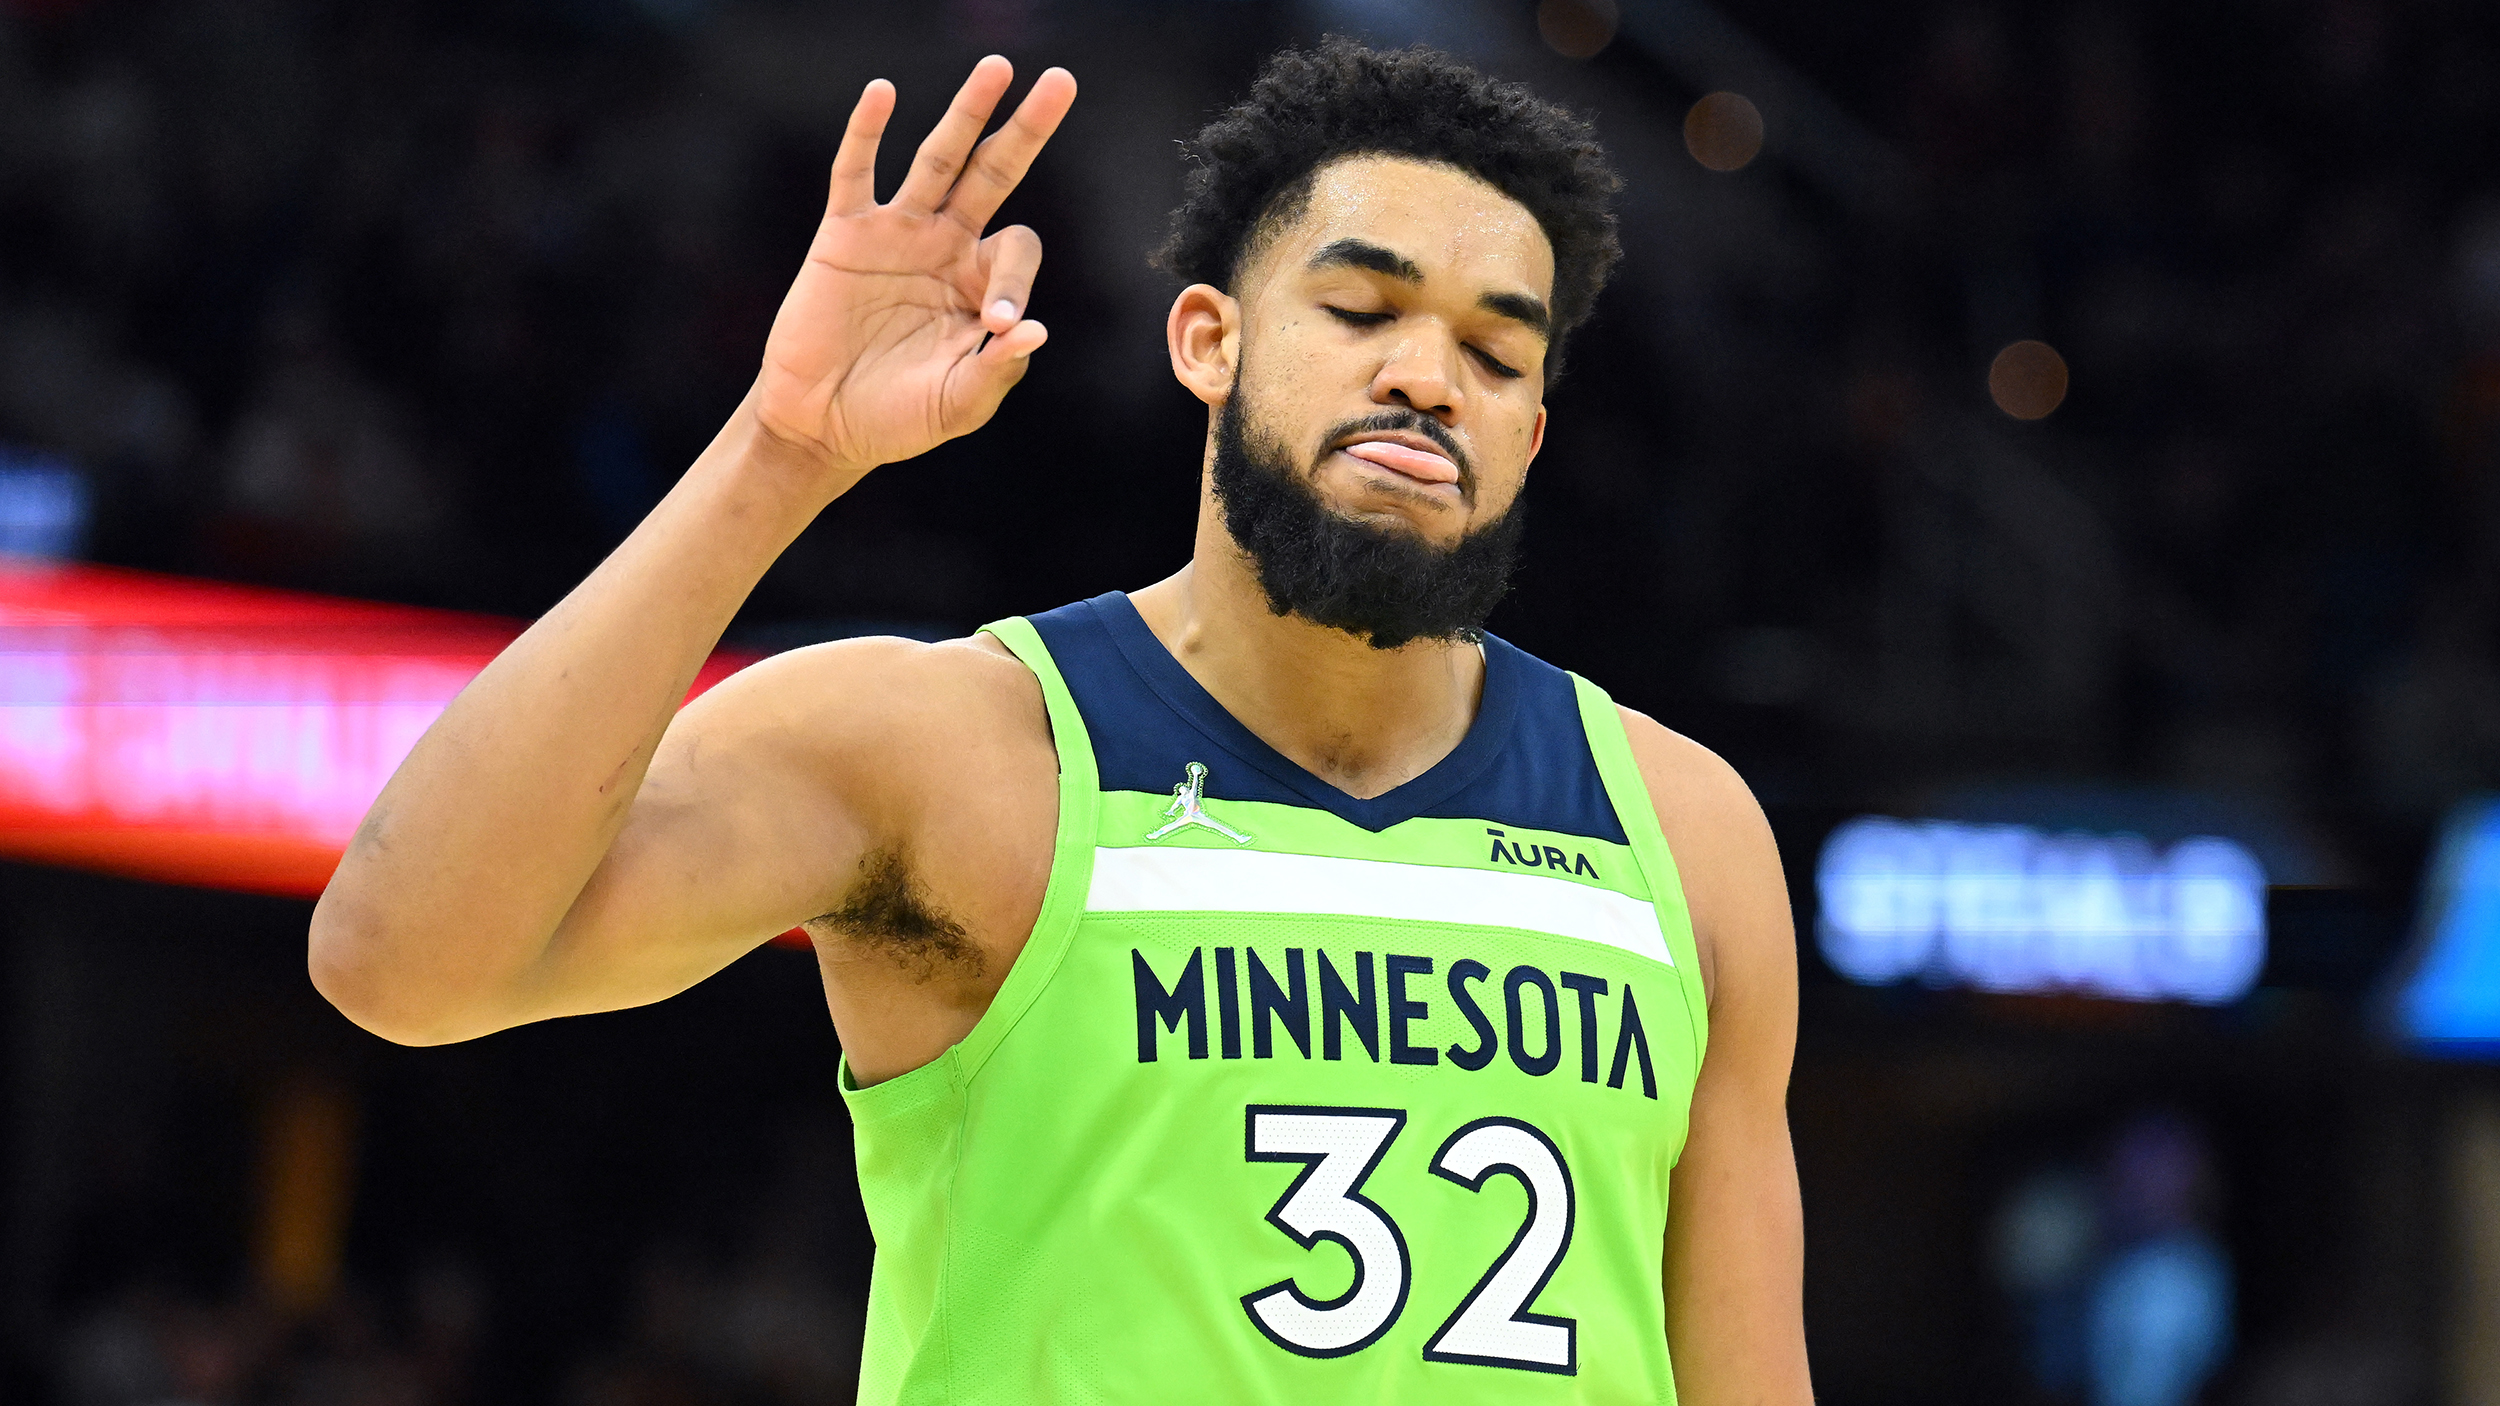 Karl-Anthony Towns #32 of the Minnesota Timberwolves celebrates after scoring during the fourth quarter against the Cleveland Cavaliers at Rocket Mortgage Fieldhouse on February 28, 2022 in Cleveland, Ohio.